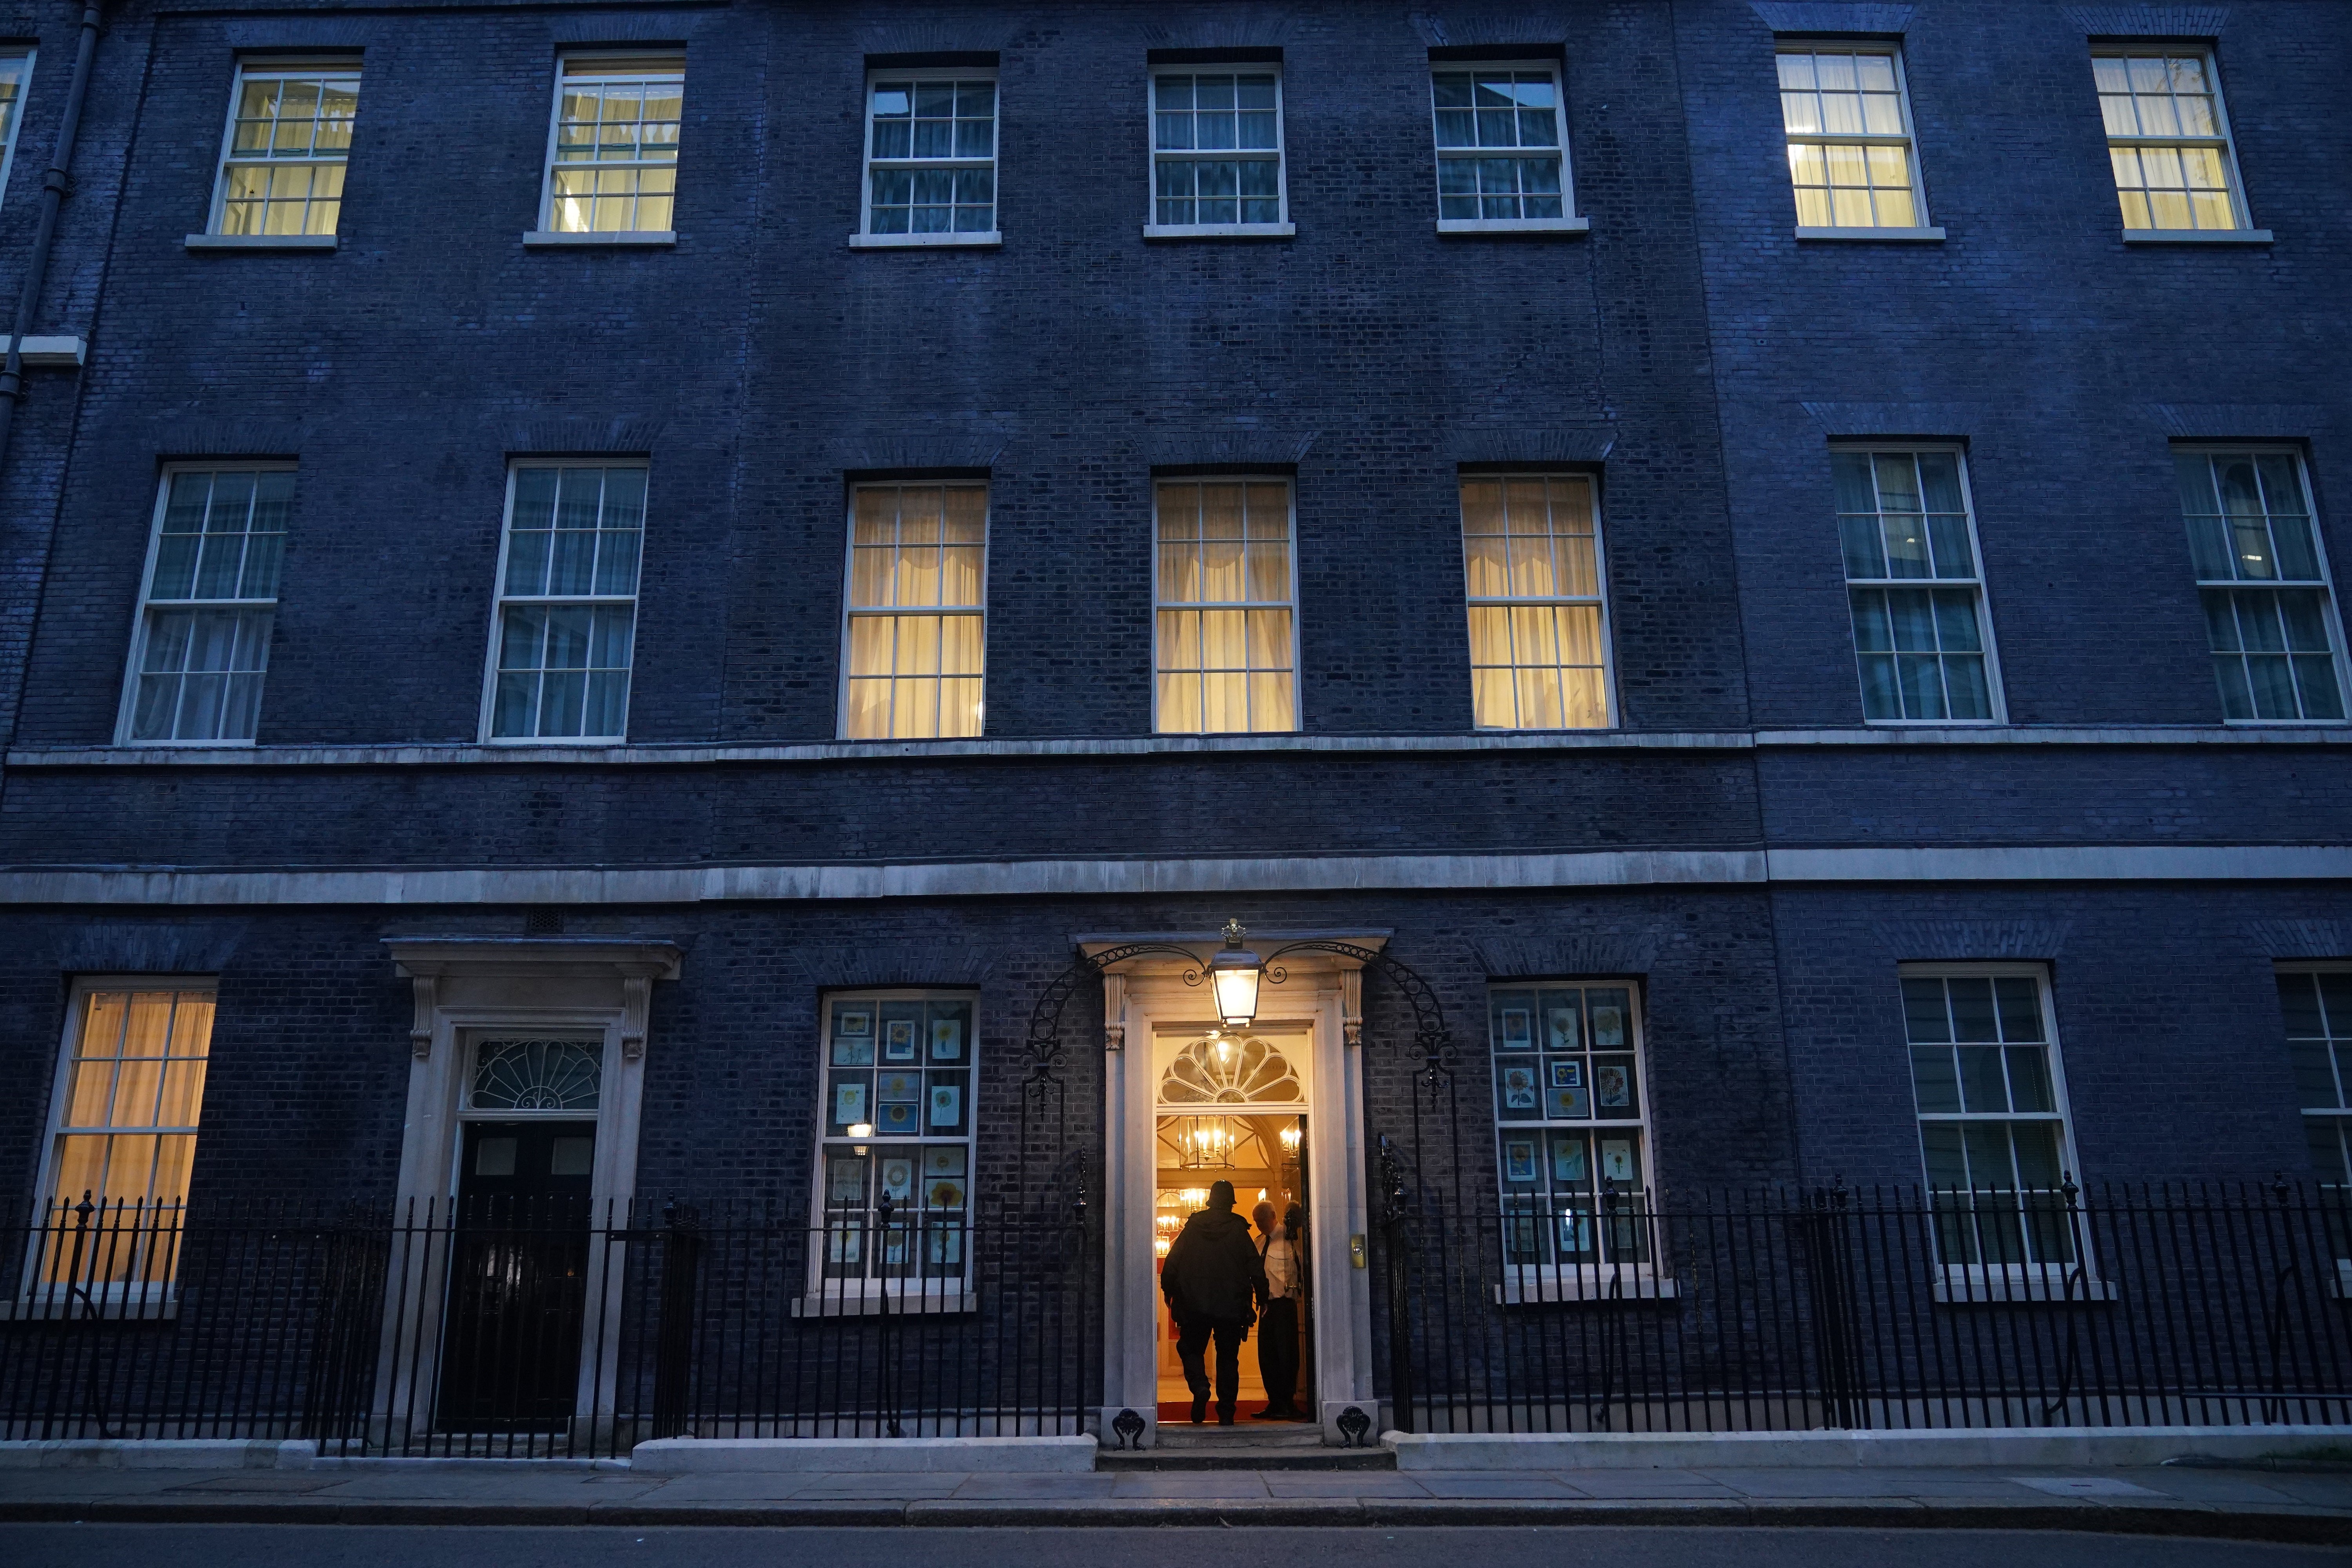 A police officer outside 10 Downing Street, in Westminster, London. Prime Minister Boris Johnson and Chancellor Rishi Sunak have been told they will be fined as part of a police probe into allegations of lockdown parties held at Downing Street. Issue date: Tuesday April 12, 2022.